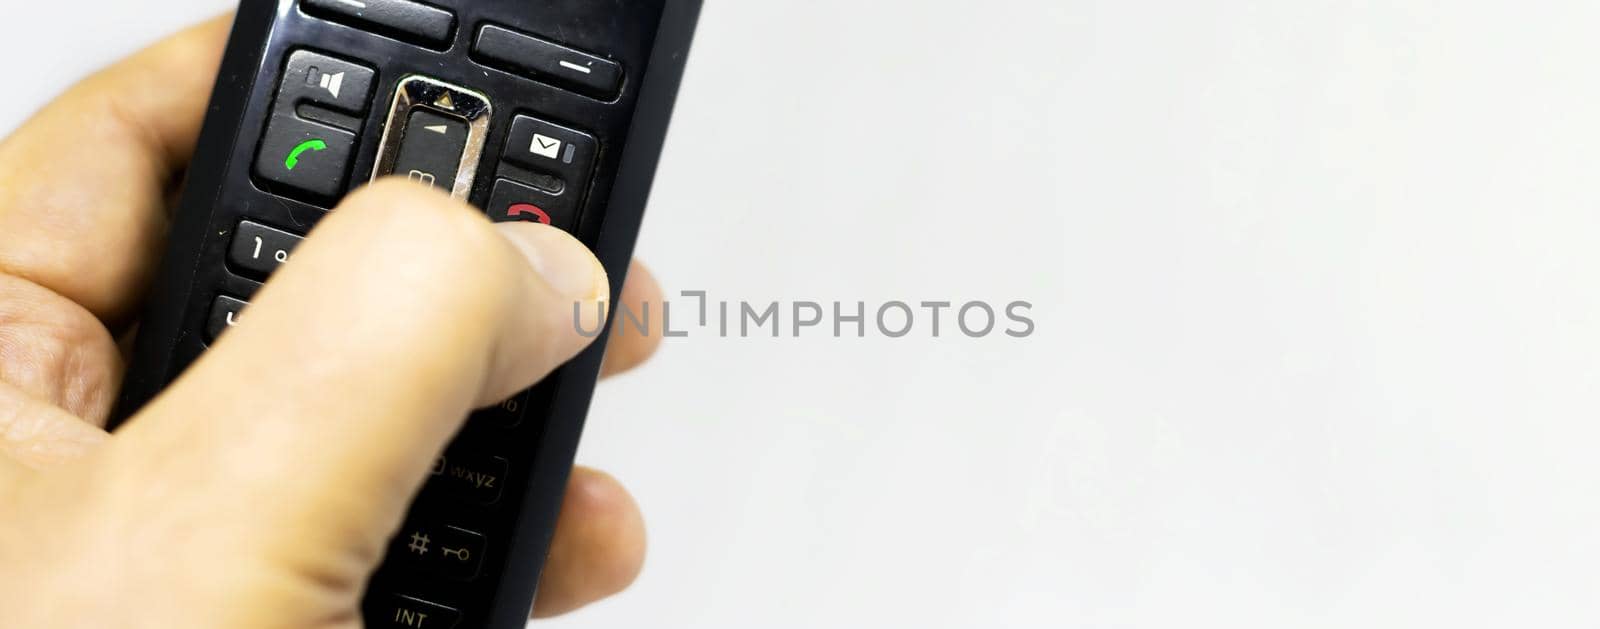 Thumb pushing the button with the red icon to reject or hang up a call on the phone by rarrarorro